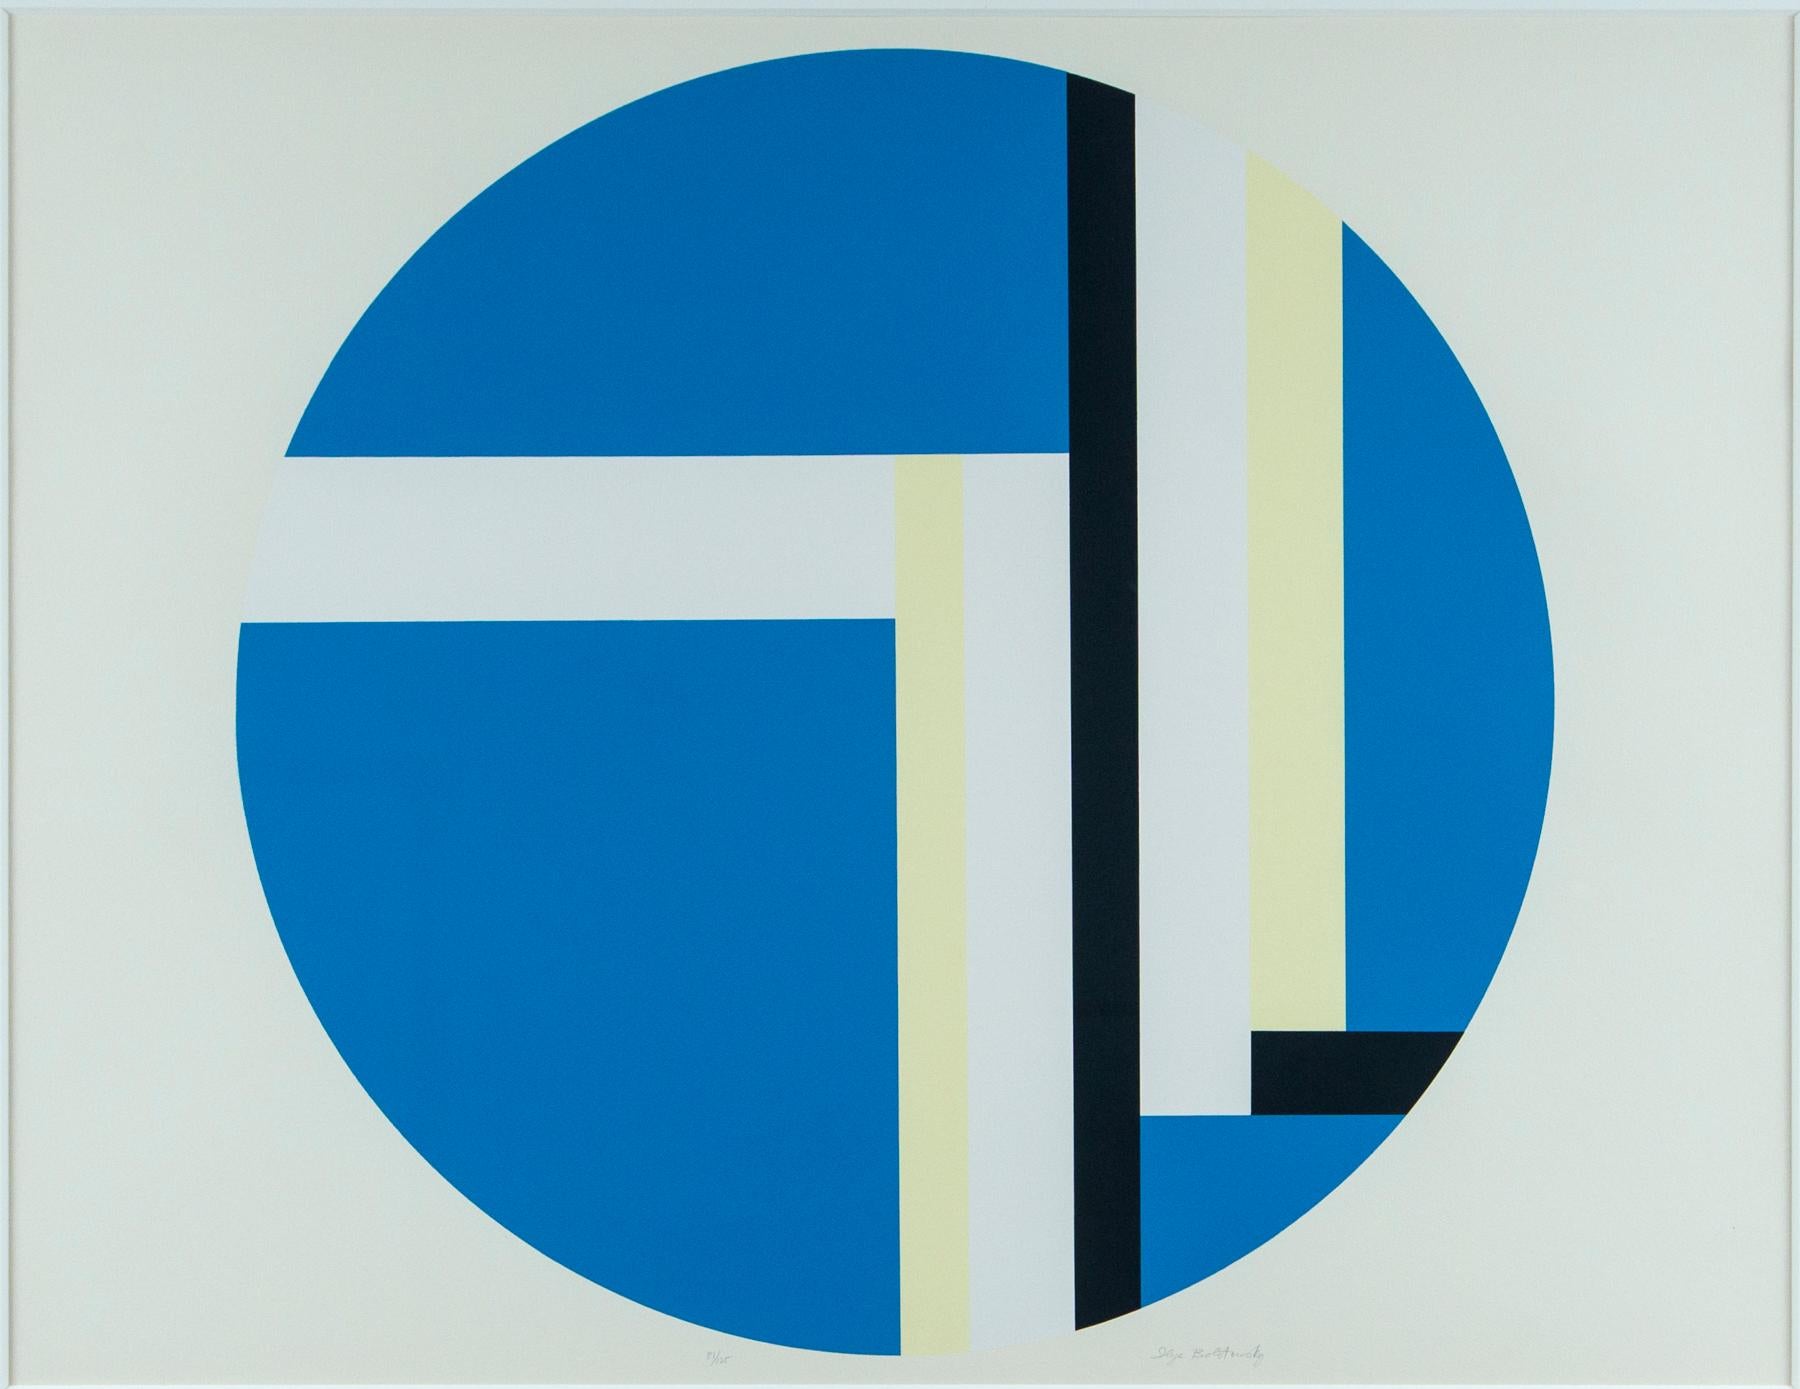 Ilya Bolotowsky silkscreen print, series 2, edition 81/125. Signed and editioned in pencil on print 81 of 125. Professionally framed with museum glass.

A fervent proponent of the power of abstract art and a major figure in American abstraction,